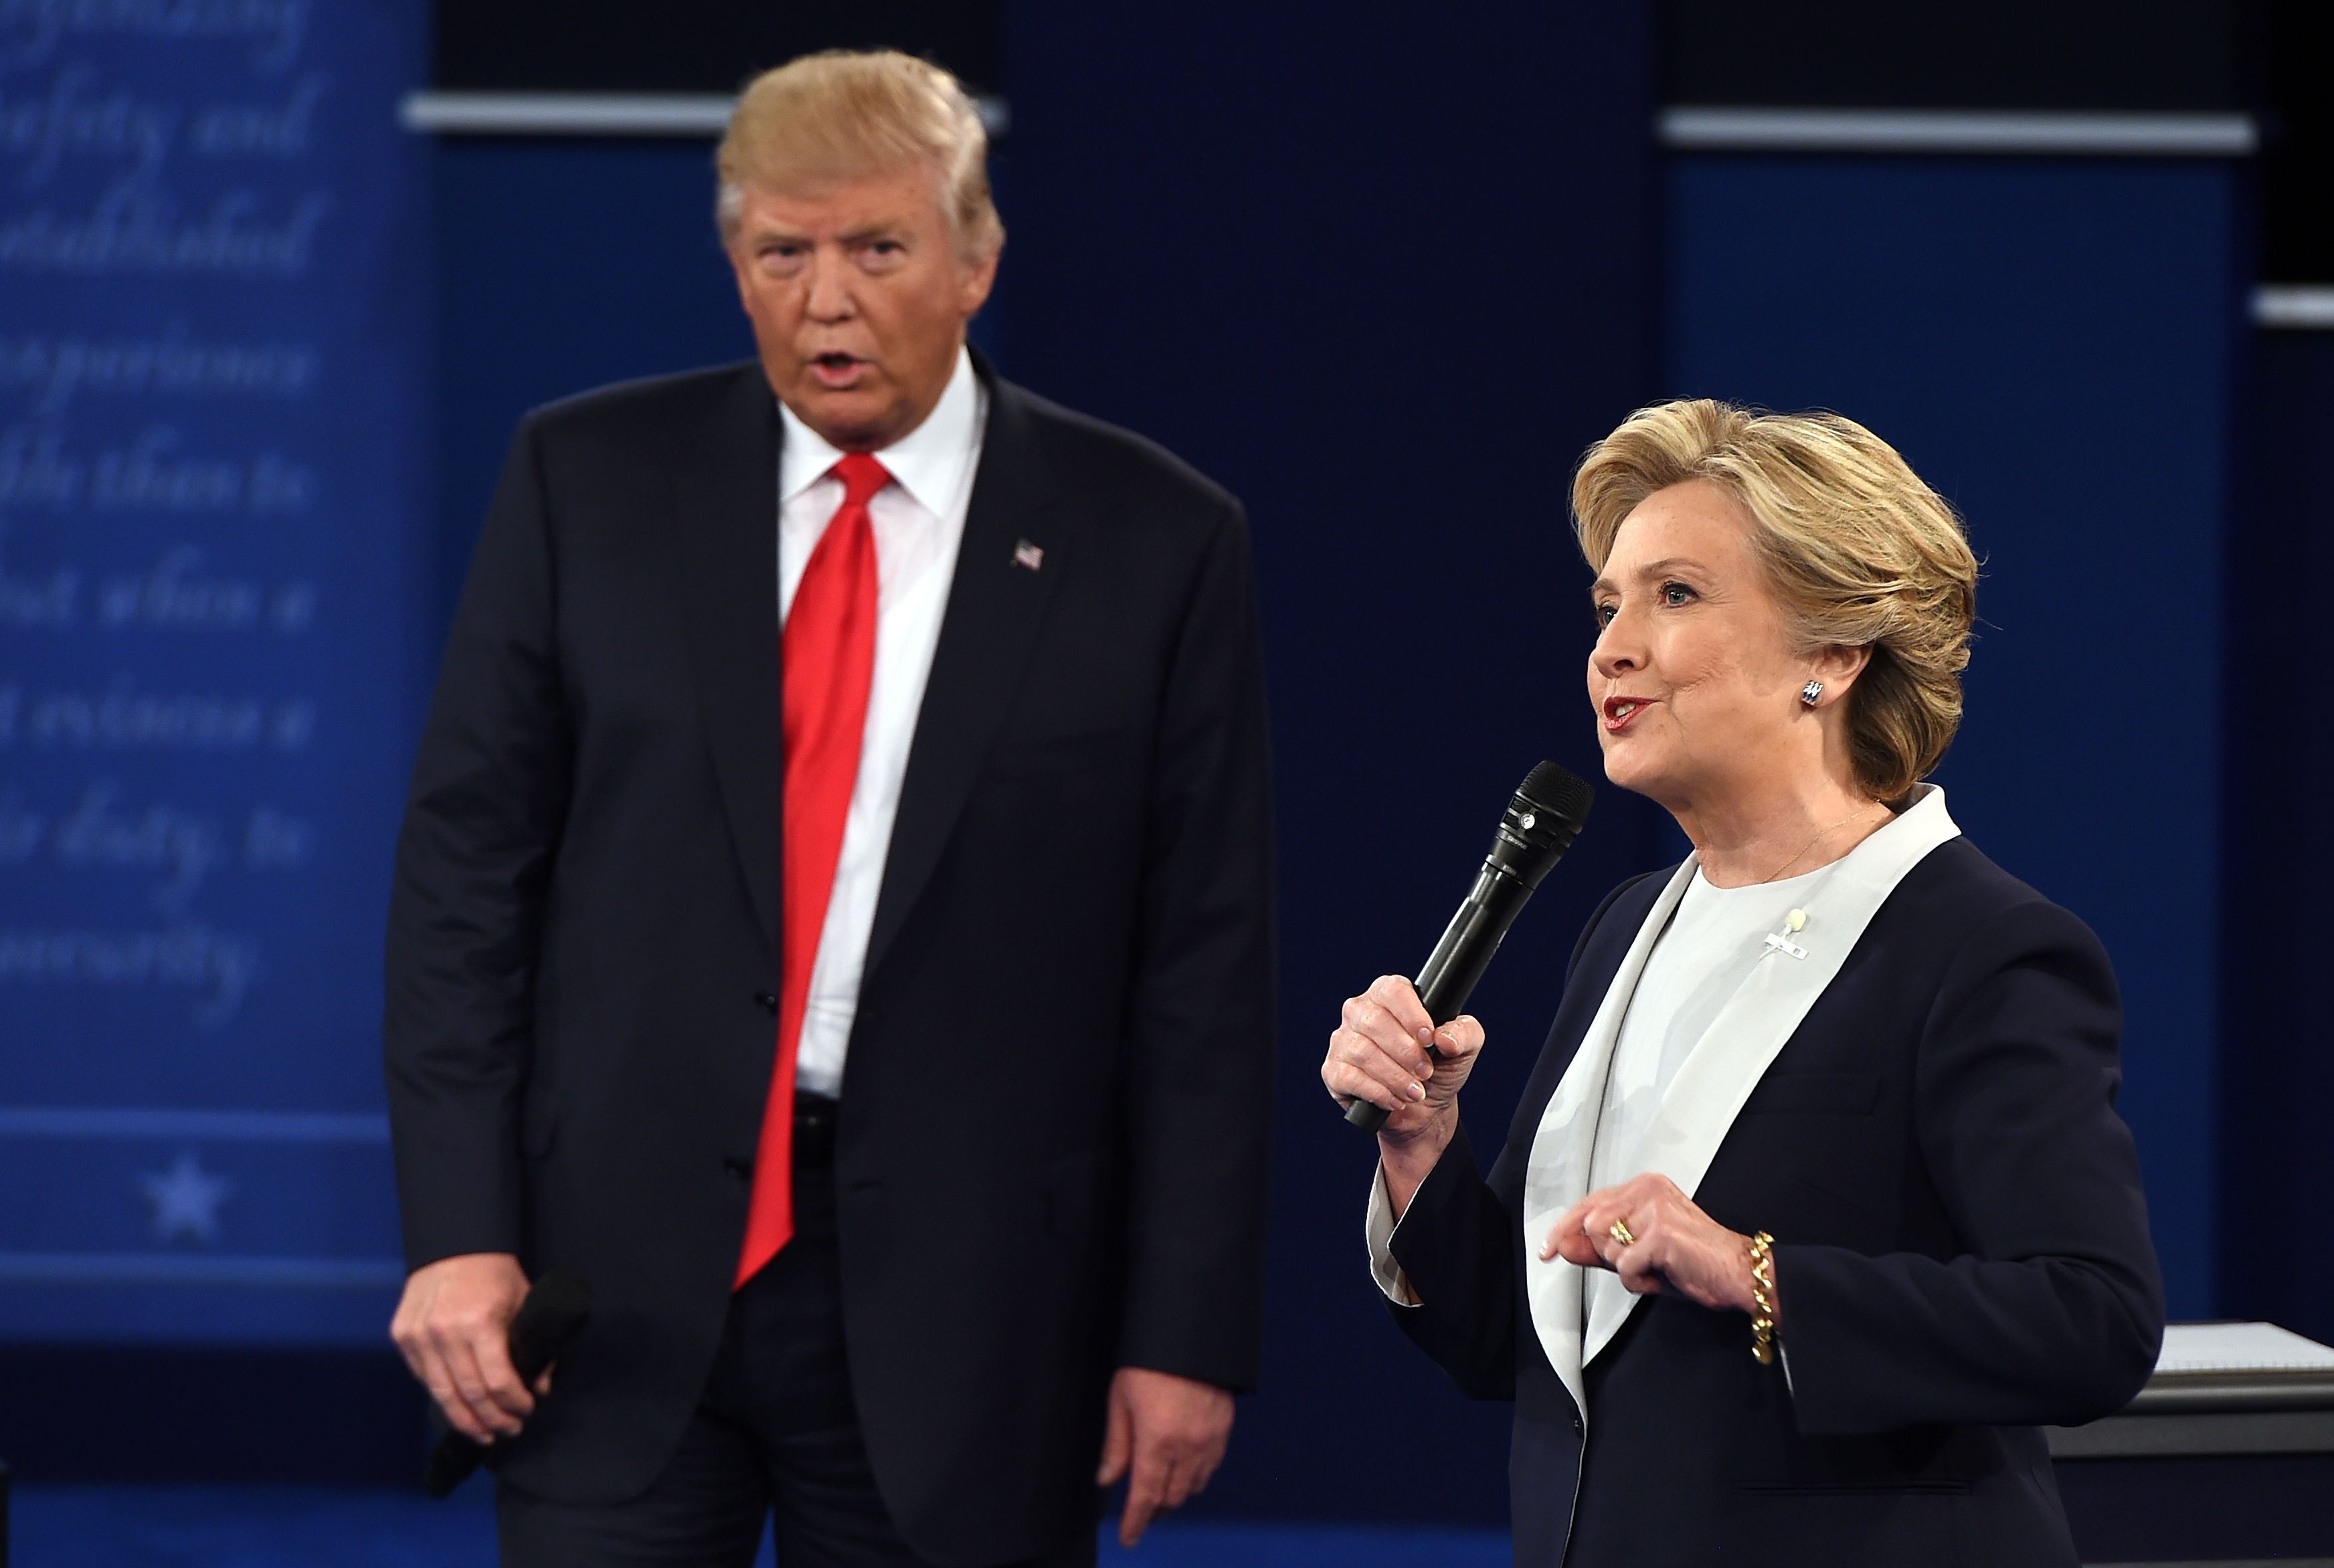 Democratic presidential candidate Hillary Clinton and Republican presidential candidate Donald Trump debate during the second presidential debate at Washington University in St. Louis on Oct. 9, 2016. (Robyn Beck—AFP/Getty Images)